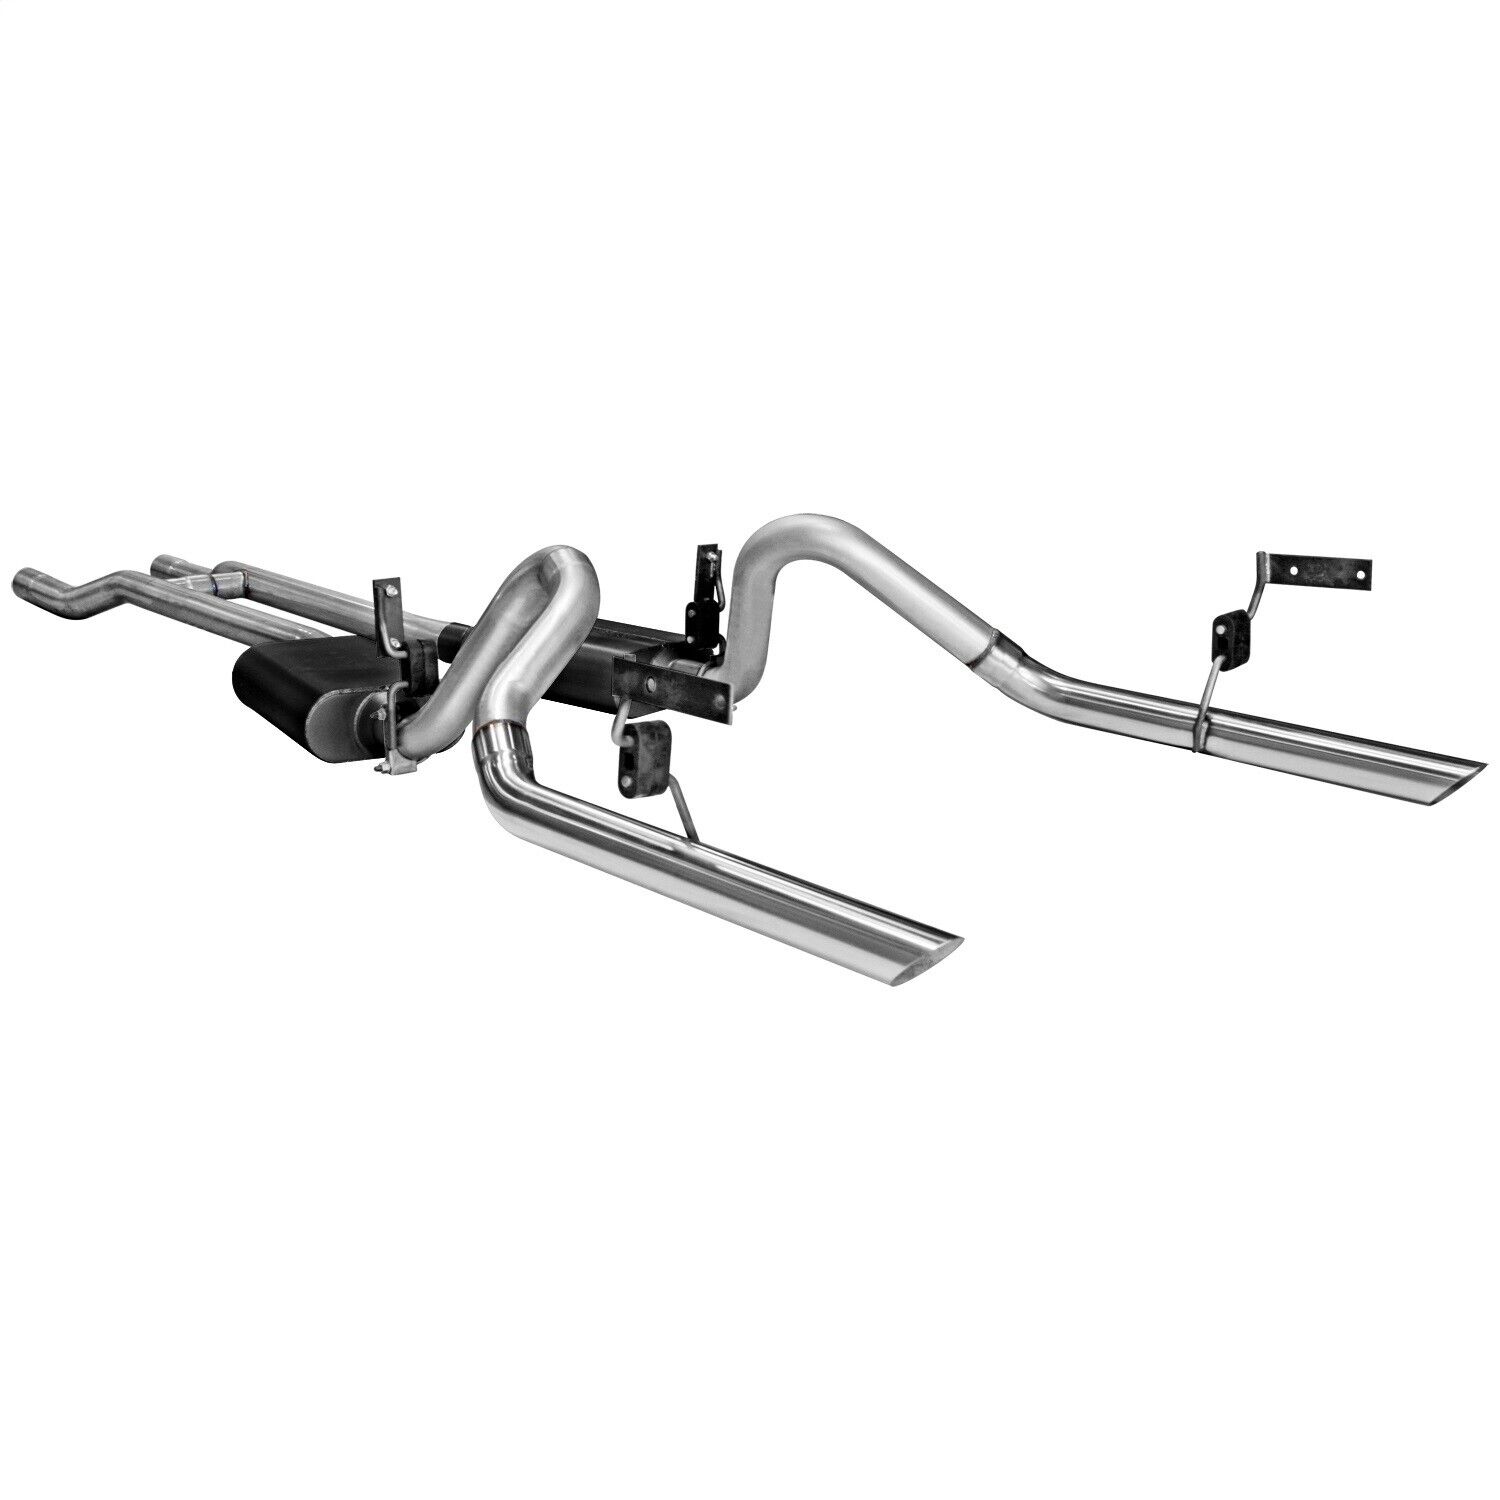 Flowmaster 17273 American Thunder Downpipe Back Exhaust System Fits Mustang